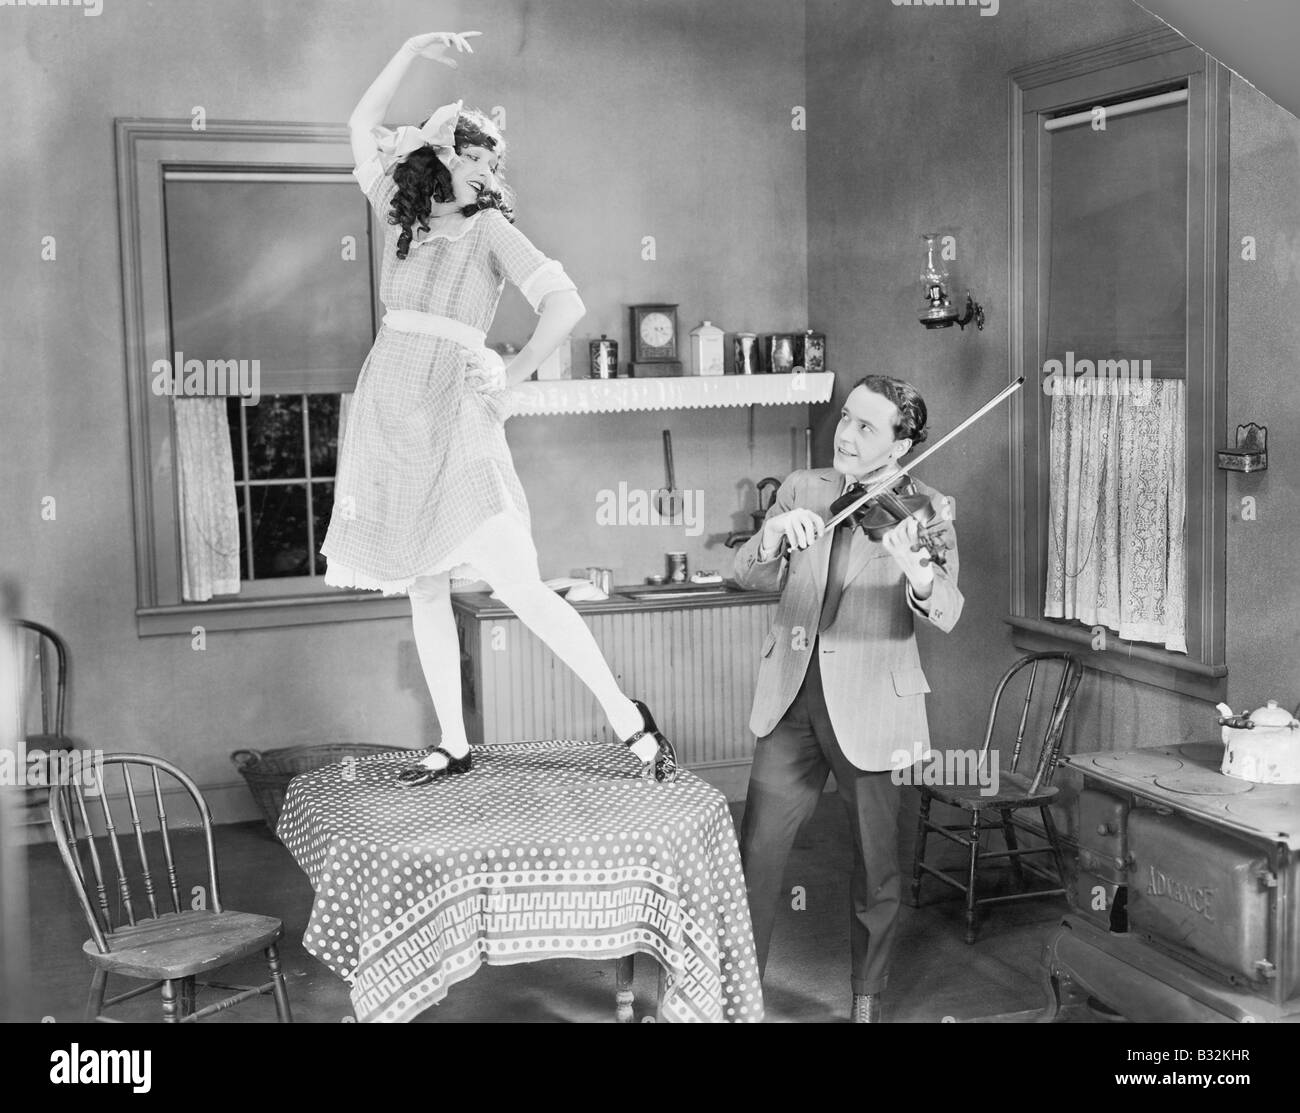 Man playing violin for woman dancing on table Stock Photo